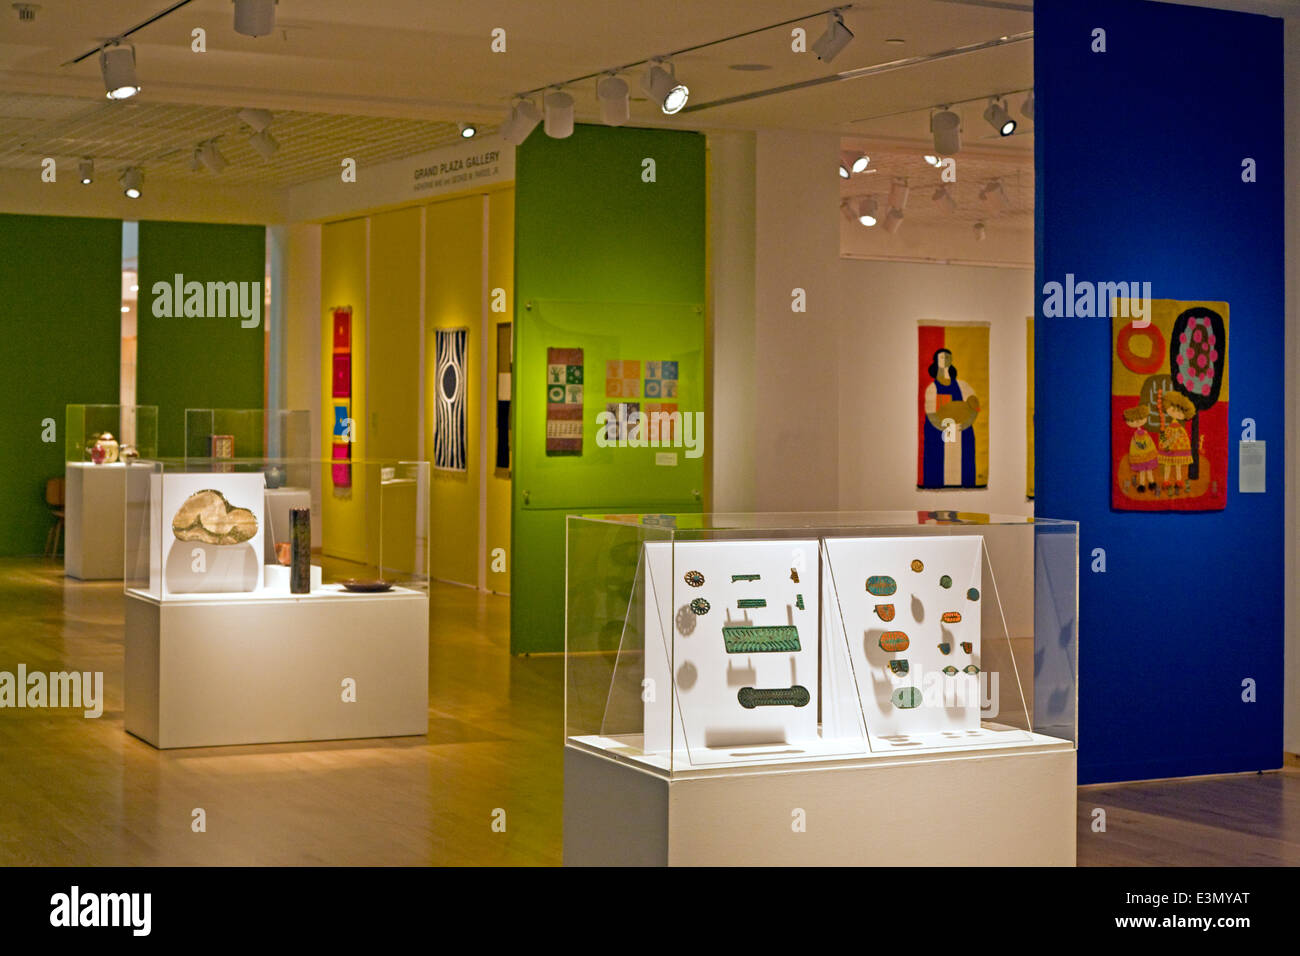 The CALIFORNIA DESIGN exhibition on display in the MINGEI INTERNATIONAL MUSEUM located in BALBOA PARK SAN DIEGO, CALIFORNIA Stock Photo